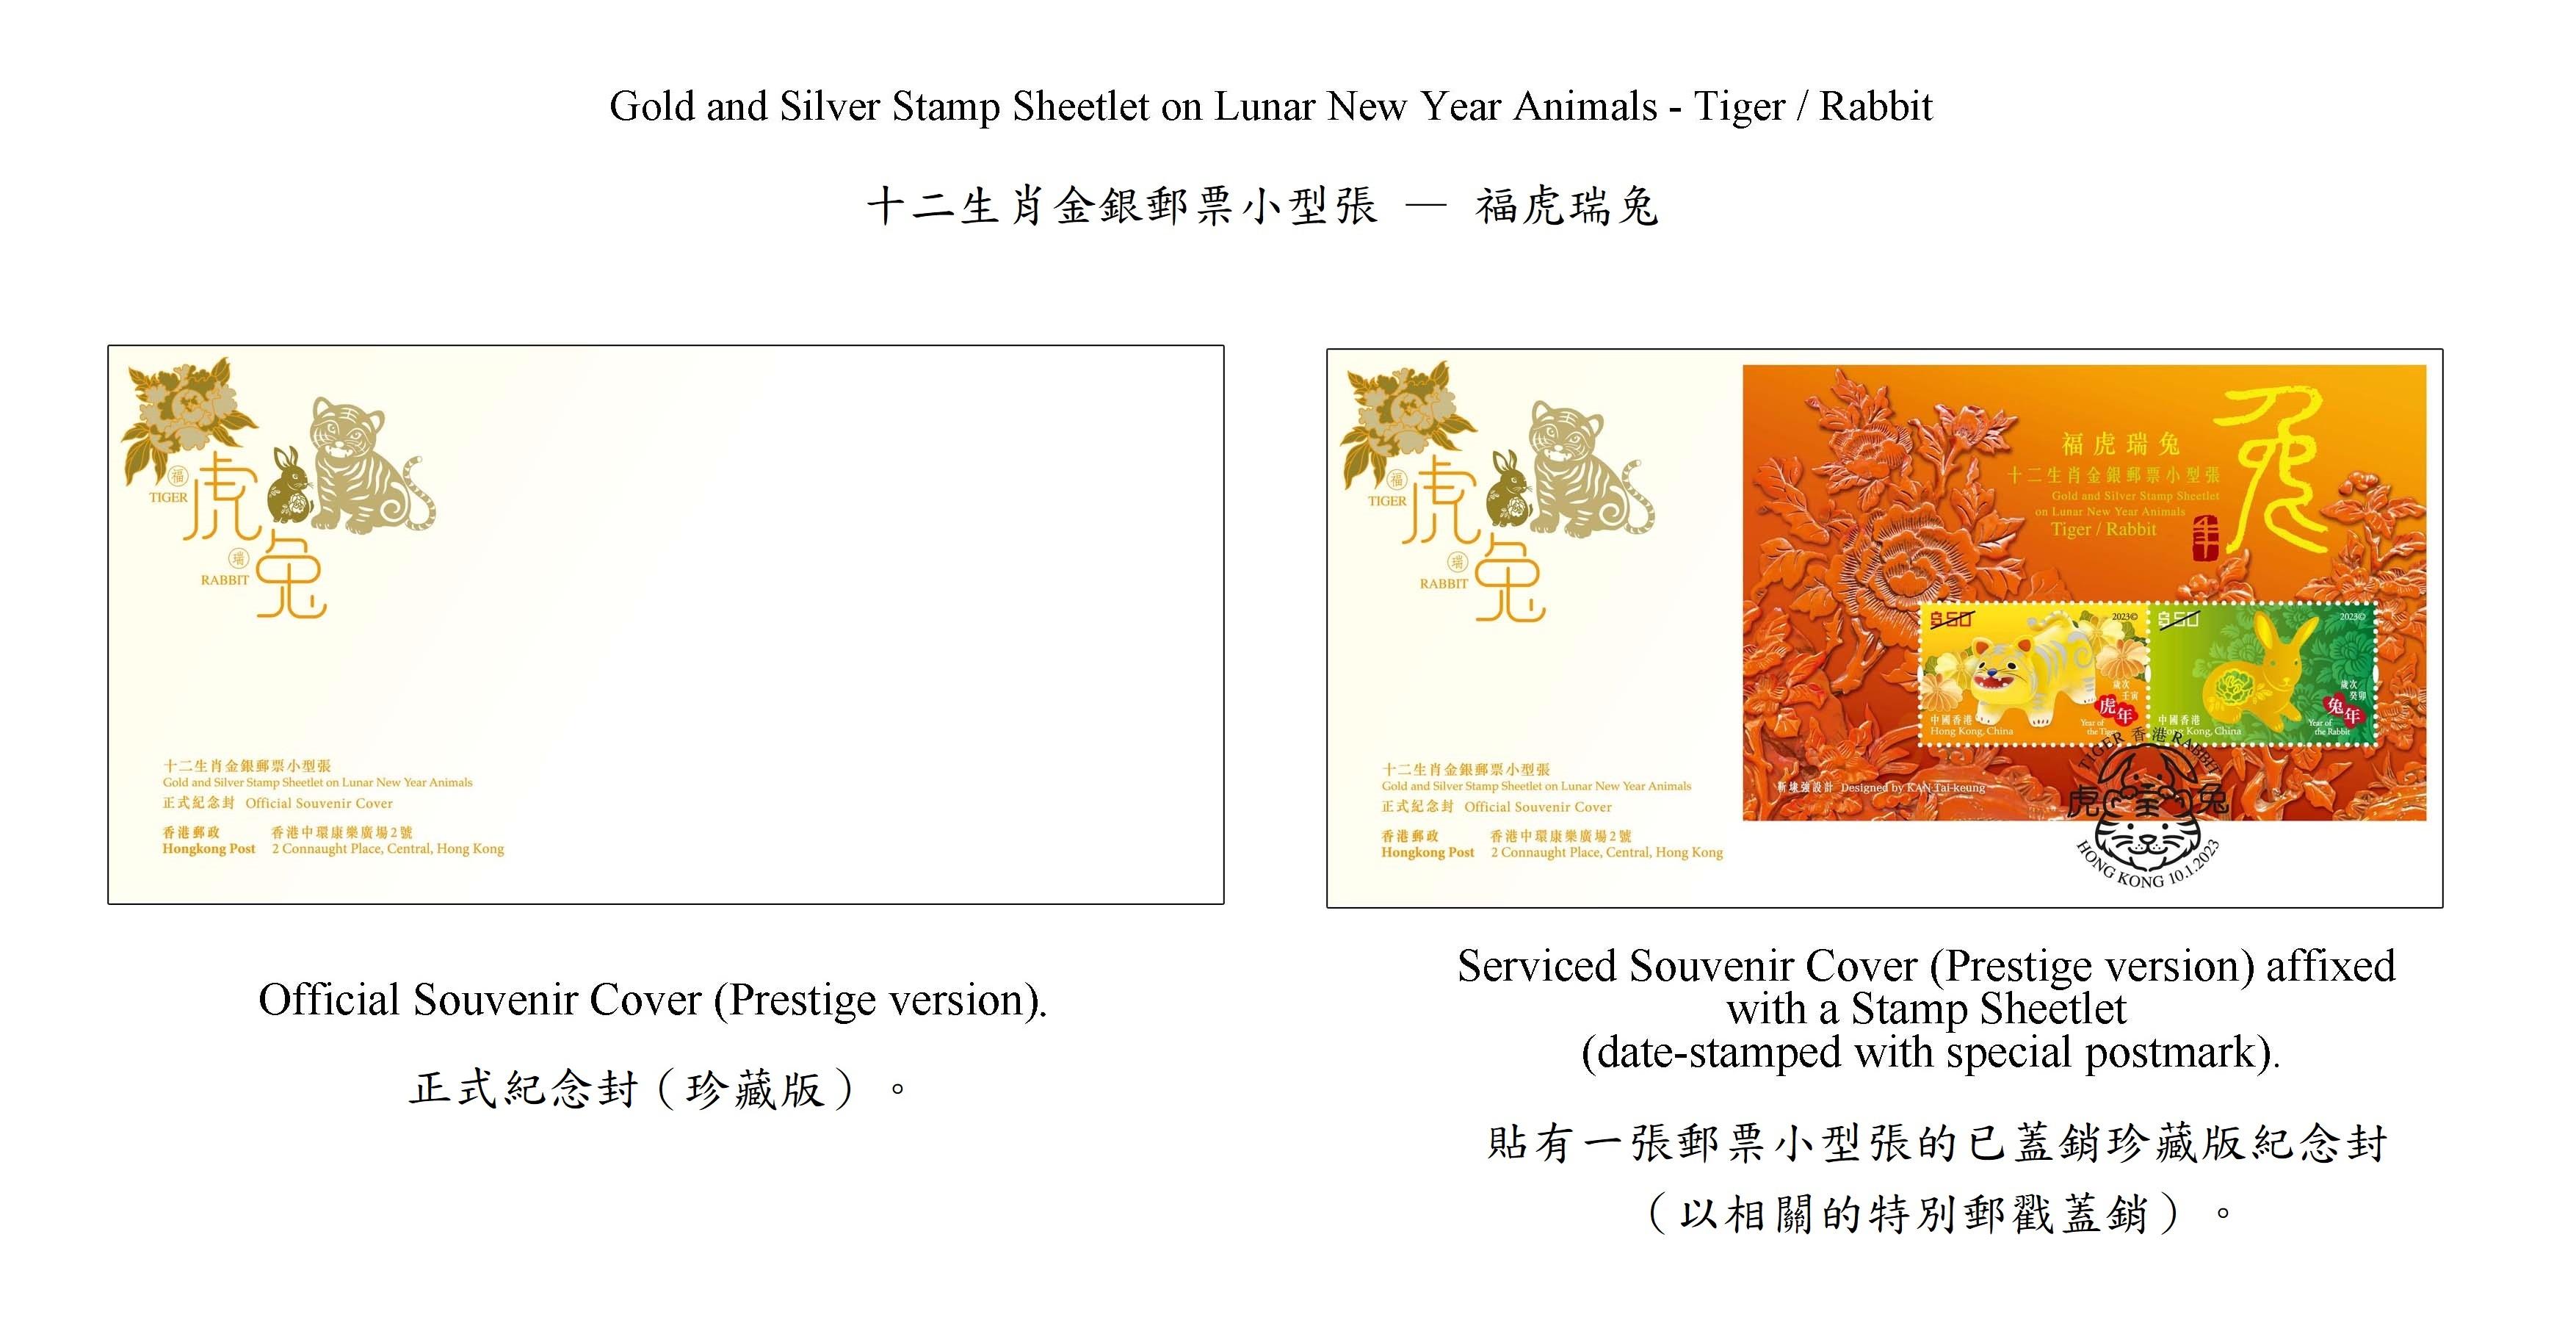 Hongkong Post will launch a special stamp issue and associated philatelic products with the theme "Year of the Rabbit" on January 10, 2023 (Tuesday). The "Gold and Silver Stamp Sheetlet on Lunar New Year Animals - Ox/Tiger" will also be launched on the same day. Photo shows the prestige souvenir covers.


